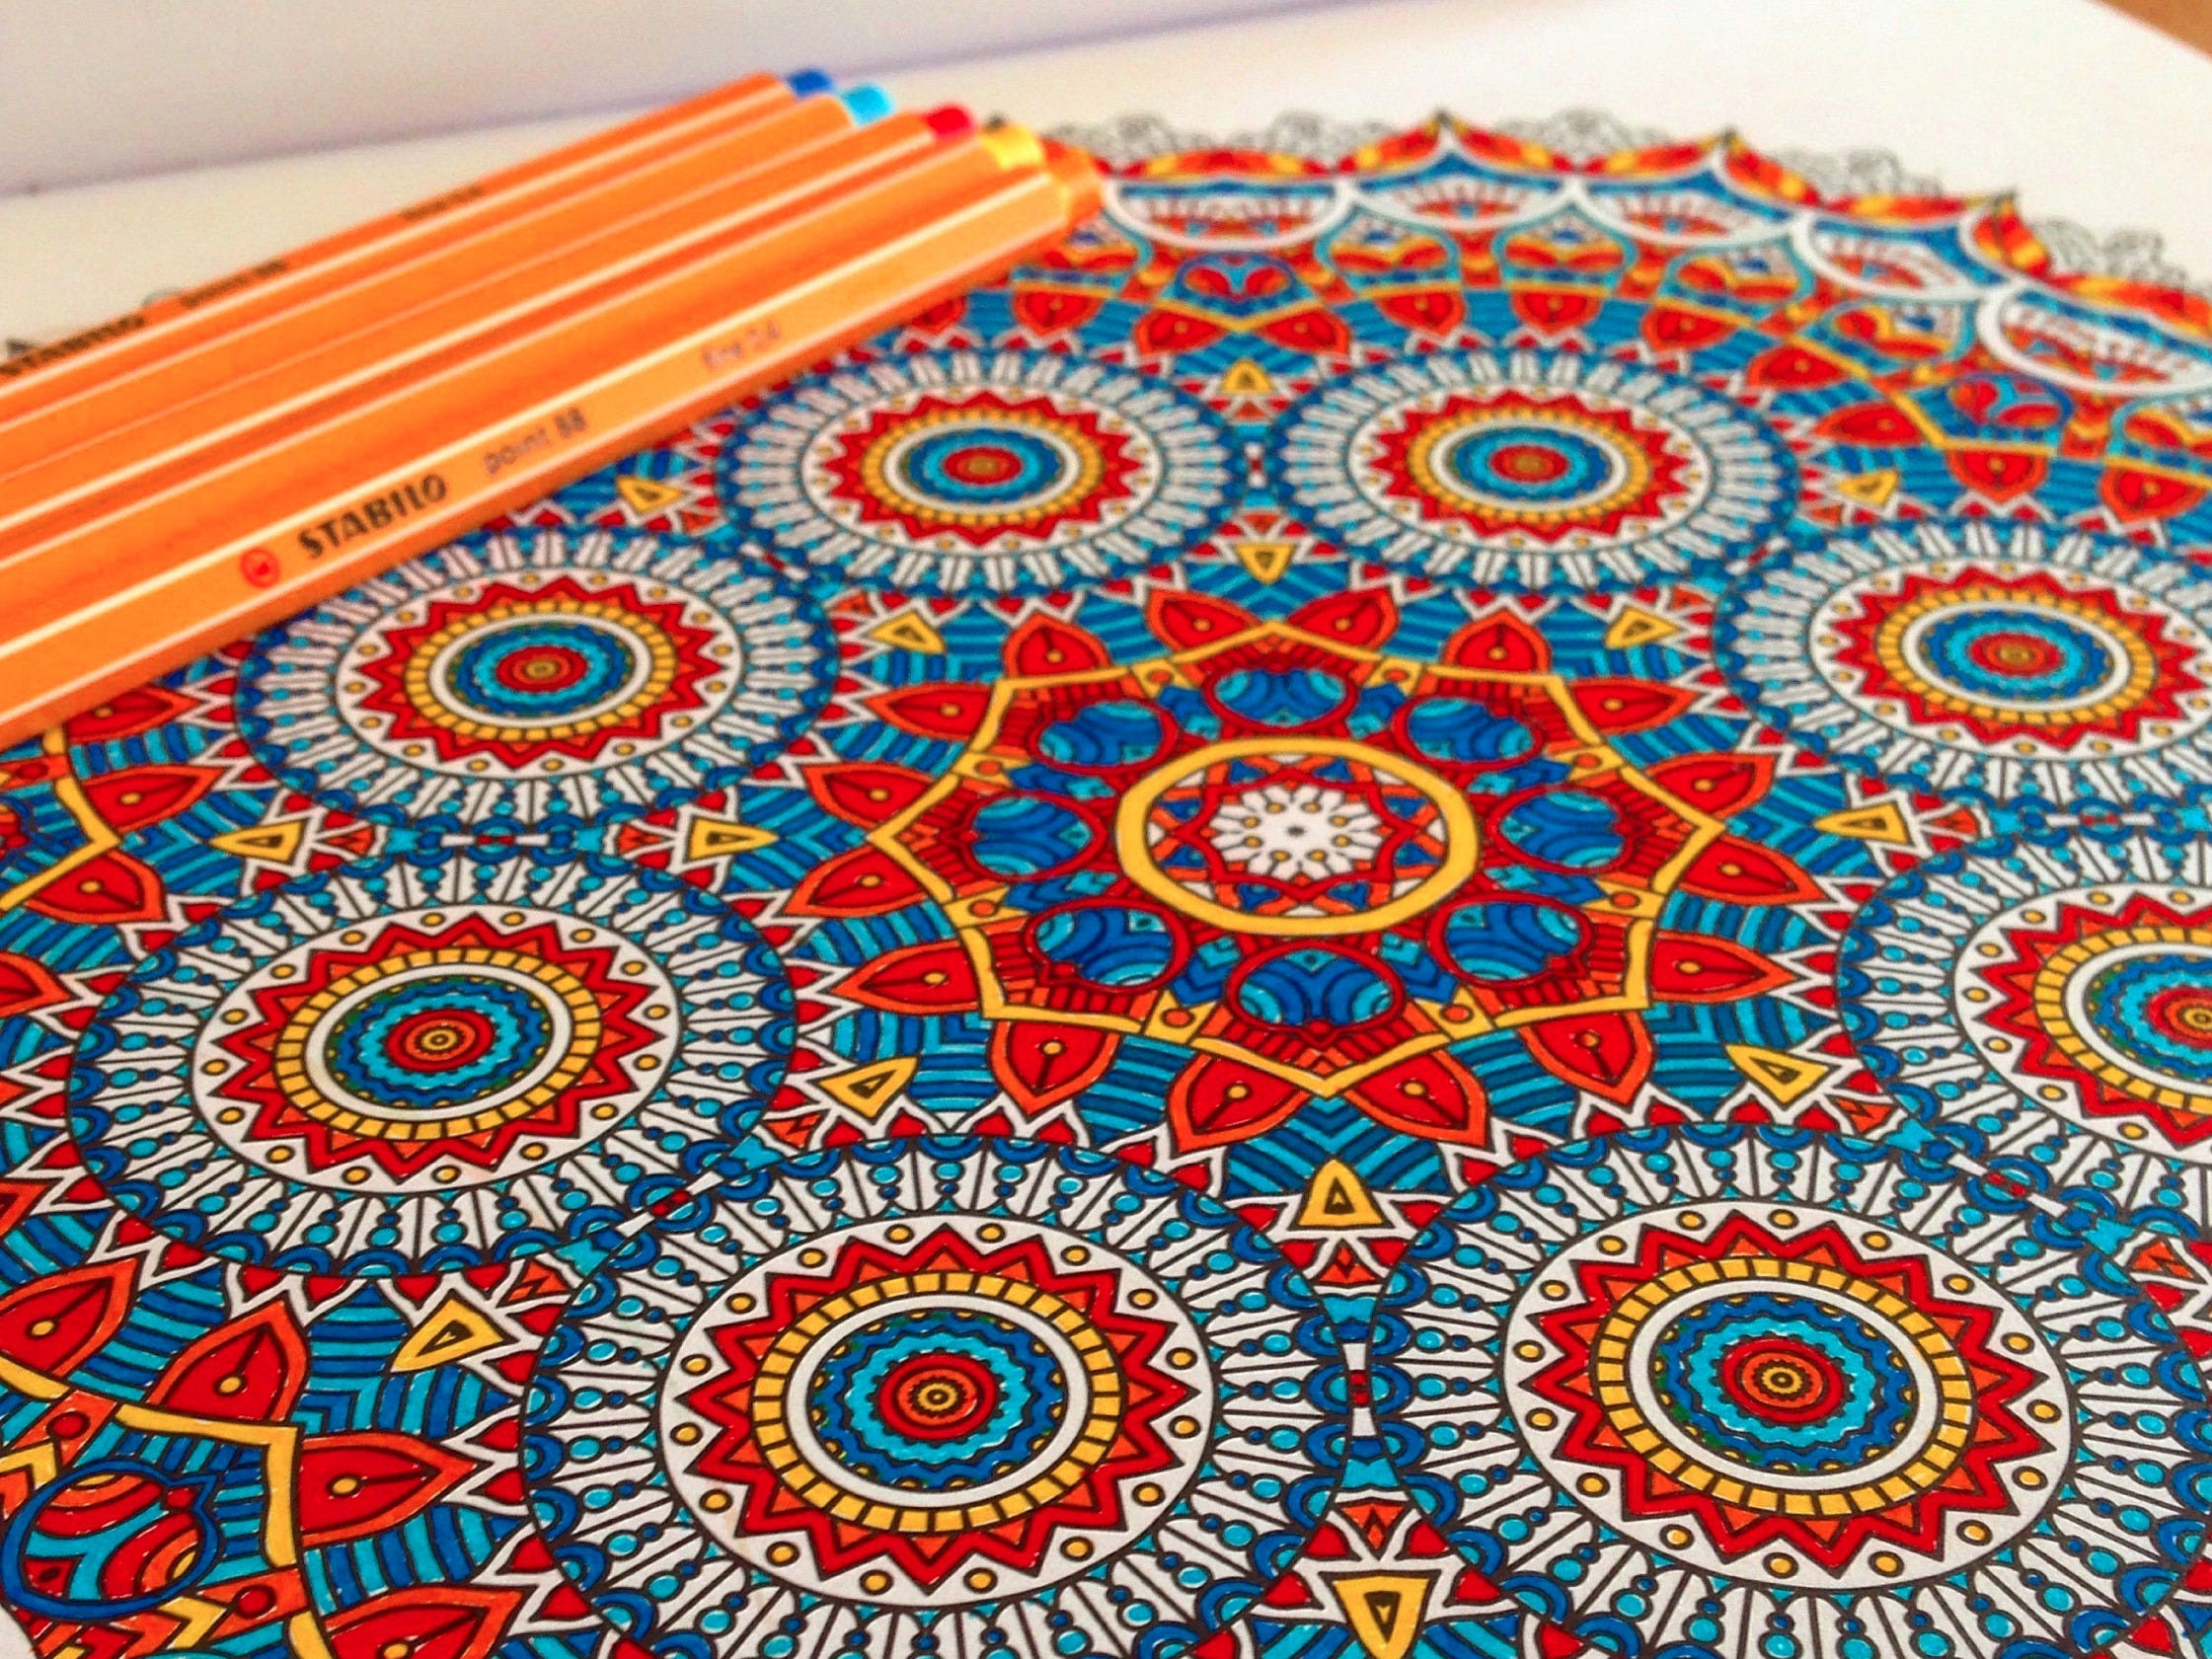 The latest trend in stress relief is adult coloring—and it may actually work Img_4460